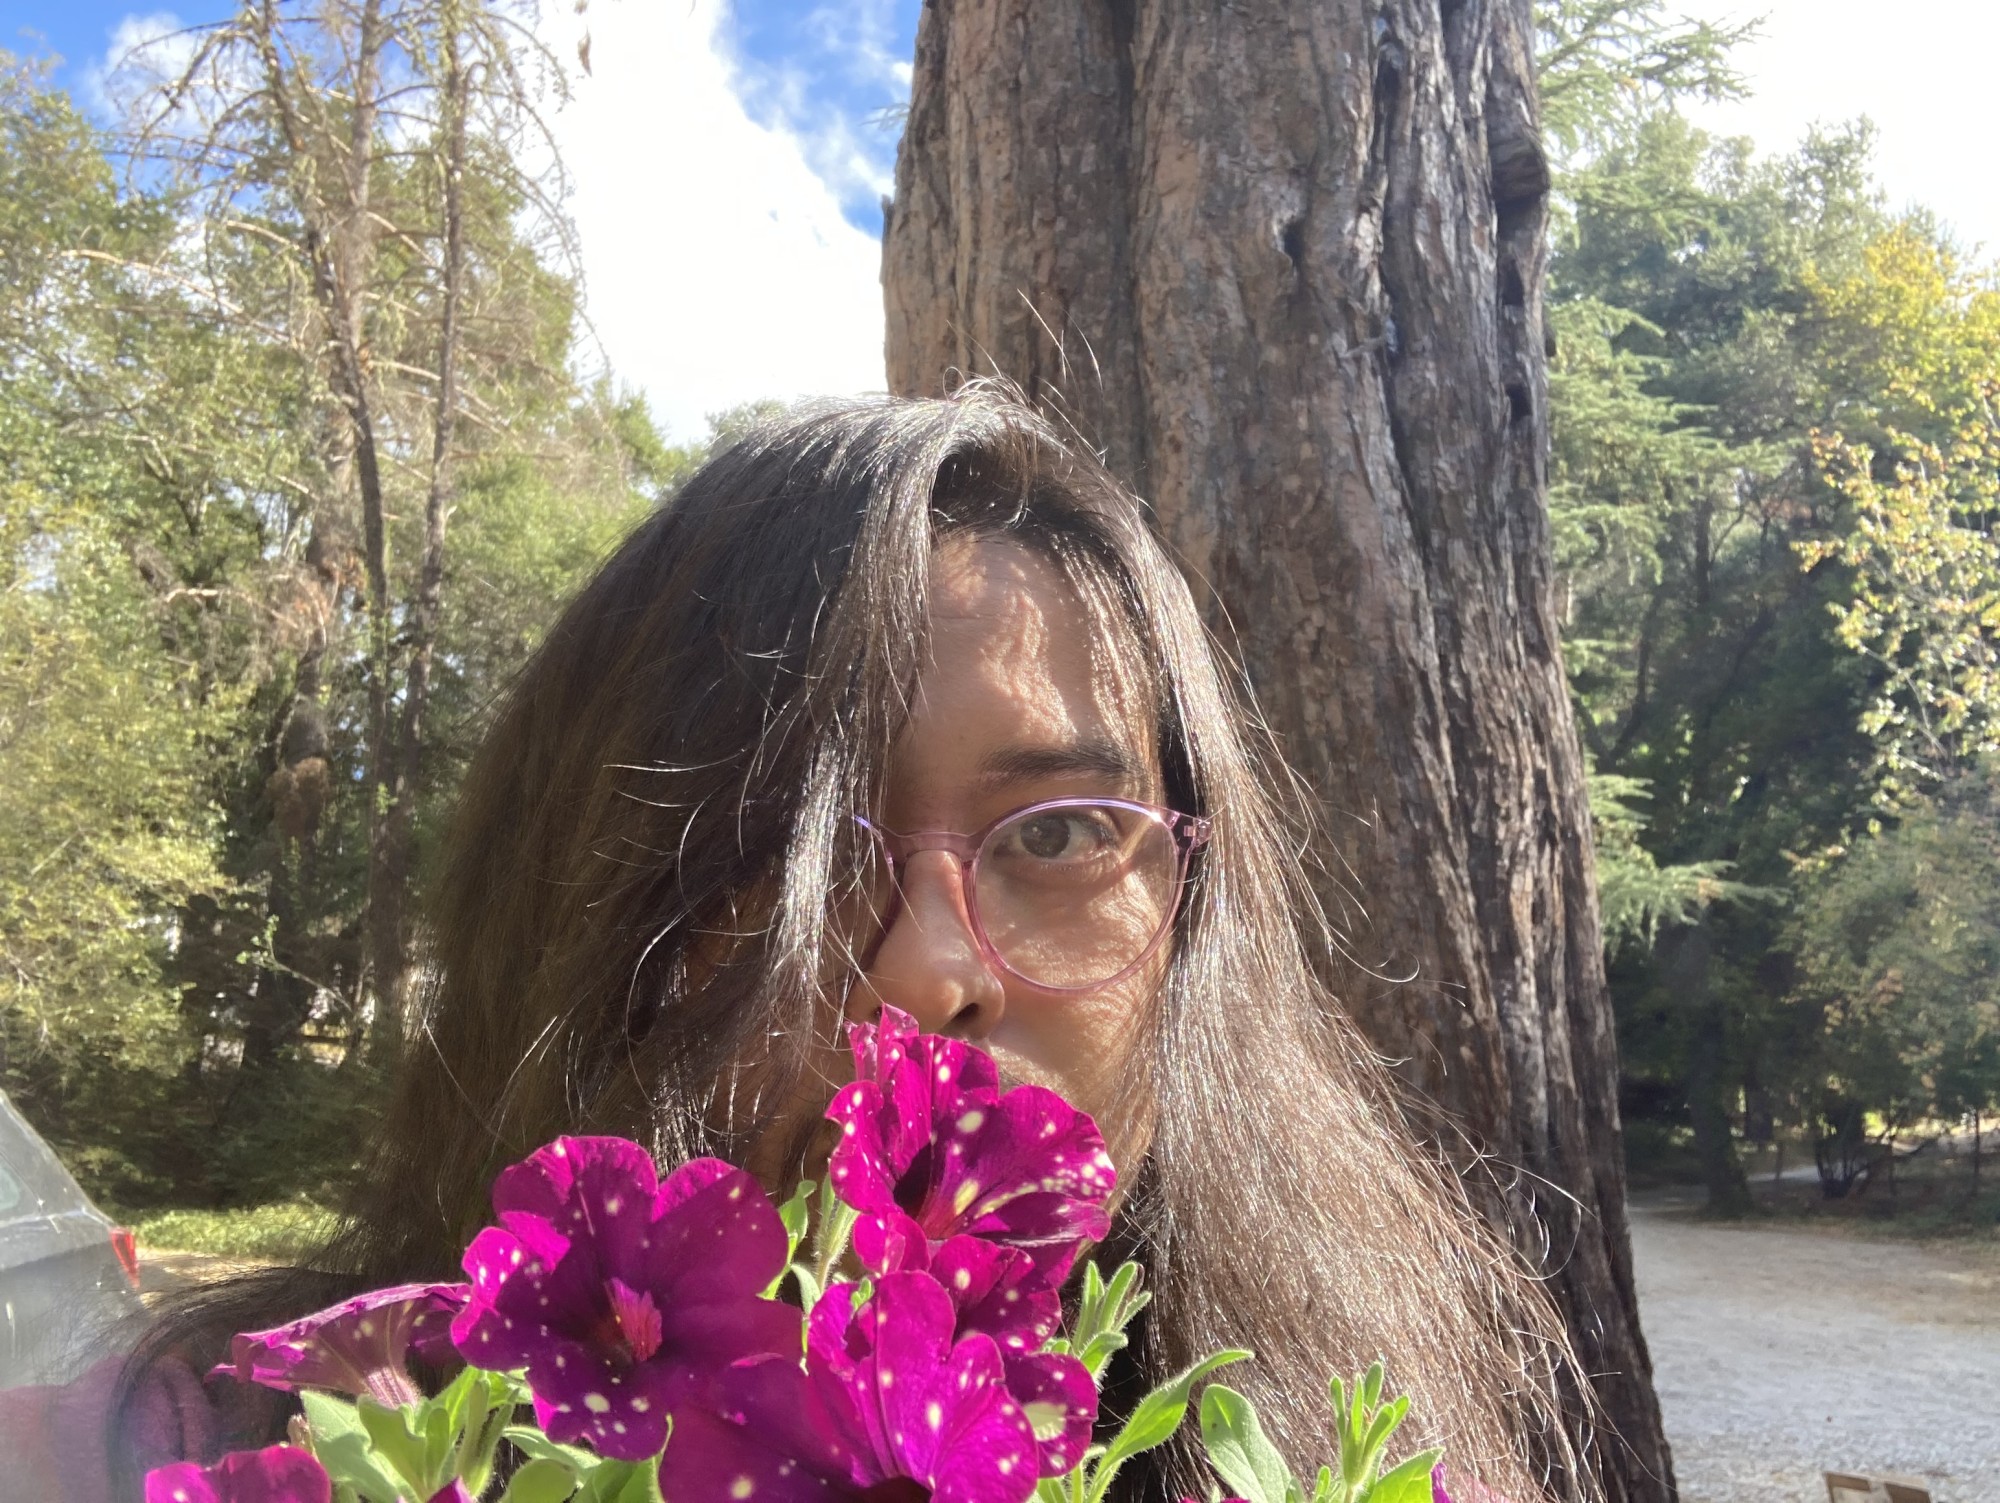 Angel stands outside by a large tree, their long hair framing their face, which is mostly obscured by the flowers they hold